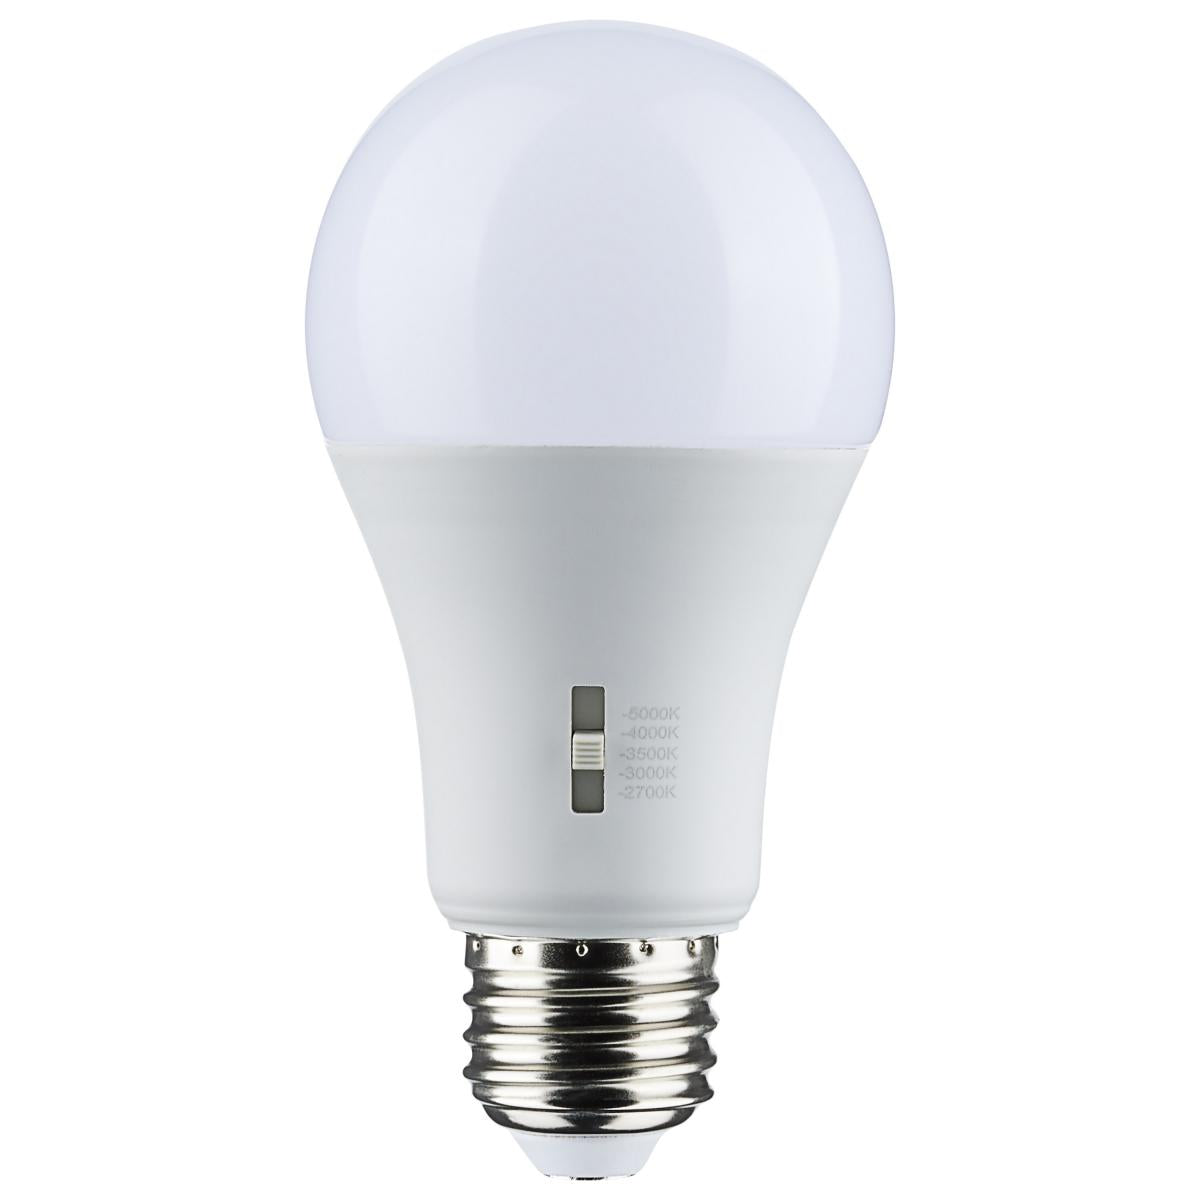 A19 LED Bulb, 60W Equivalent, 9 Watt, 800 Lumens, Selectable CCT 2700K to 5000K, E26 Medium Base, Frosted Finish - Bees Lighting